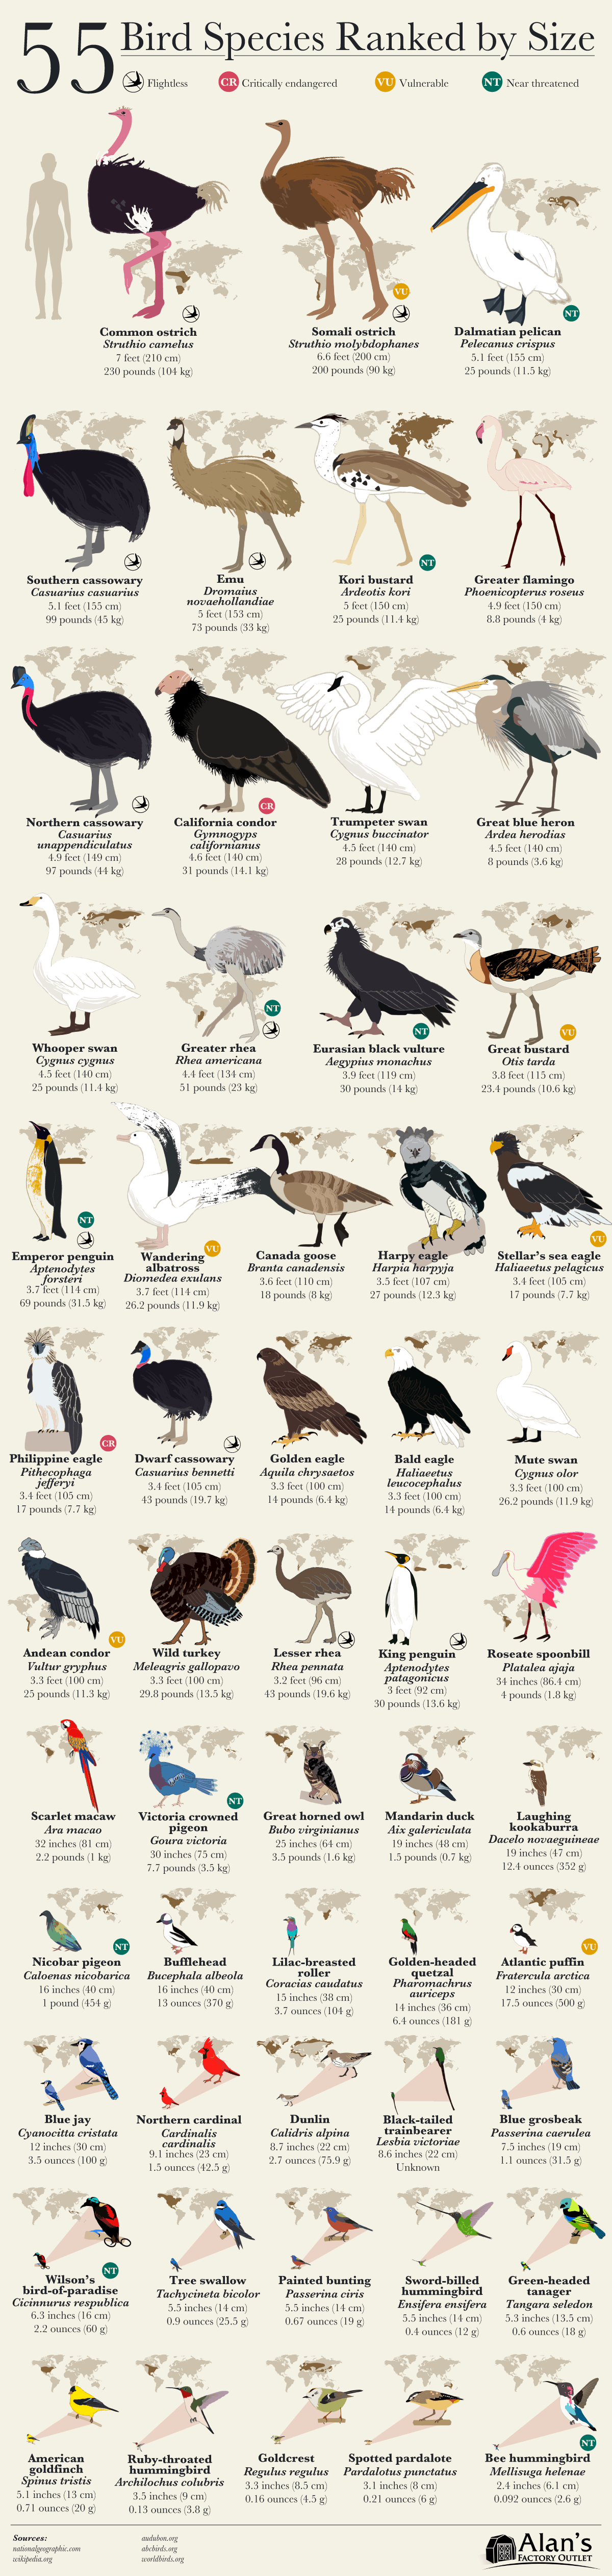 This Incredible Bird Chart Ranks Birds by Size